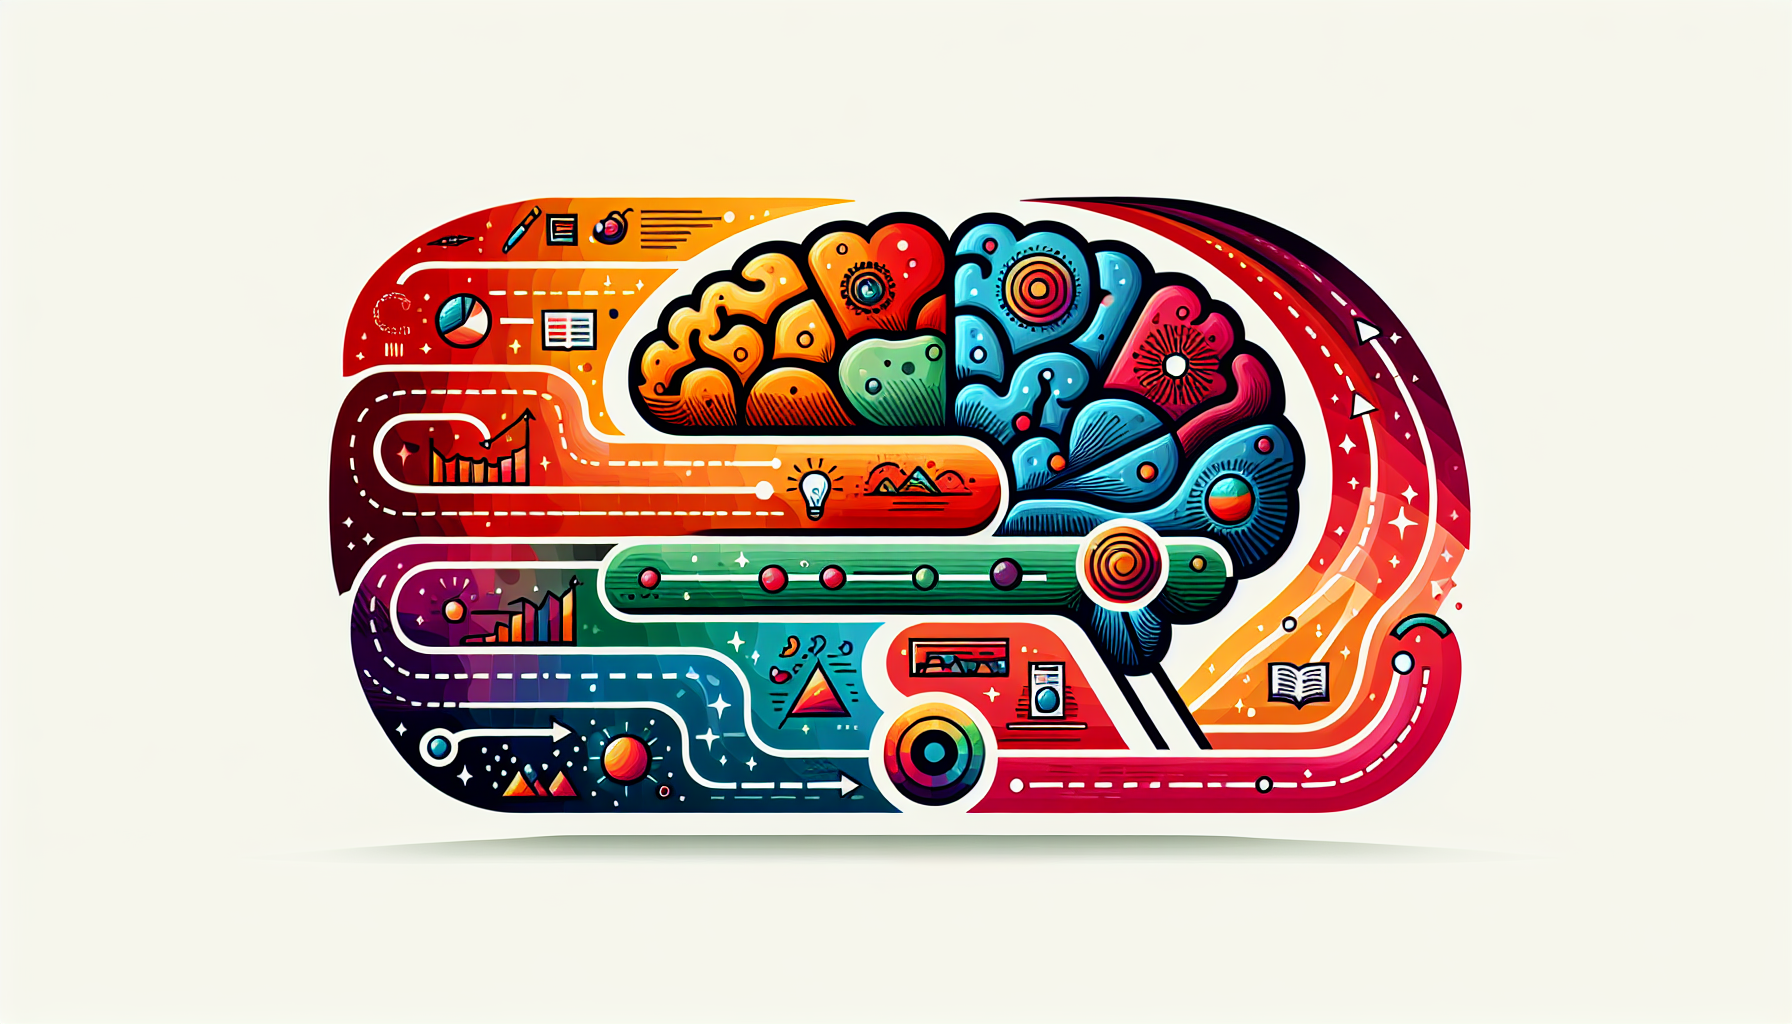 An illustration of a brain with segments representing different goals and a pathway connecting them.